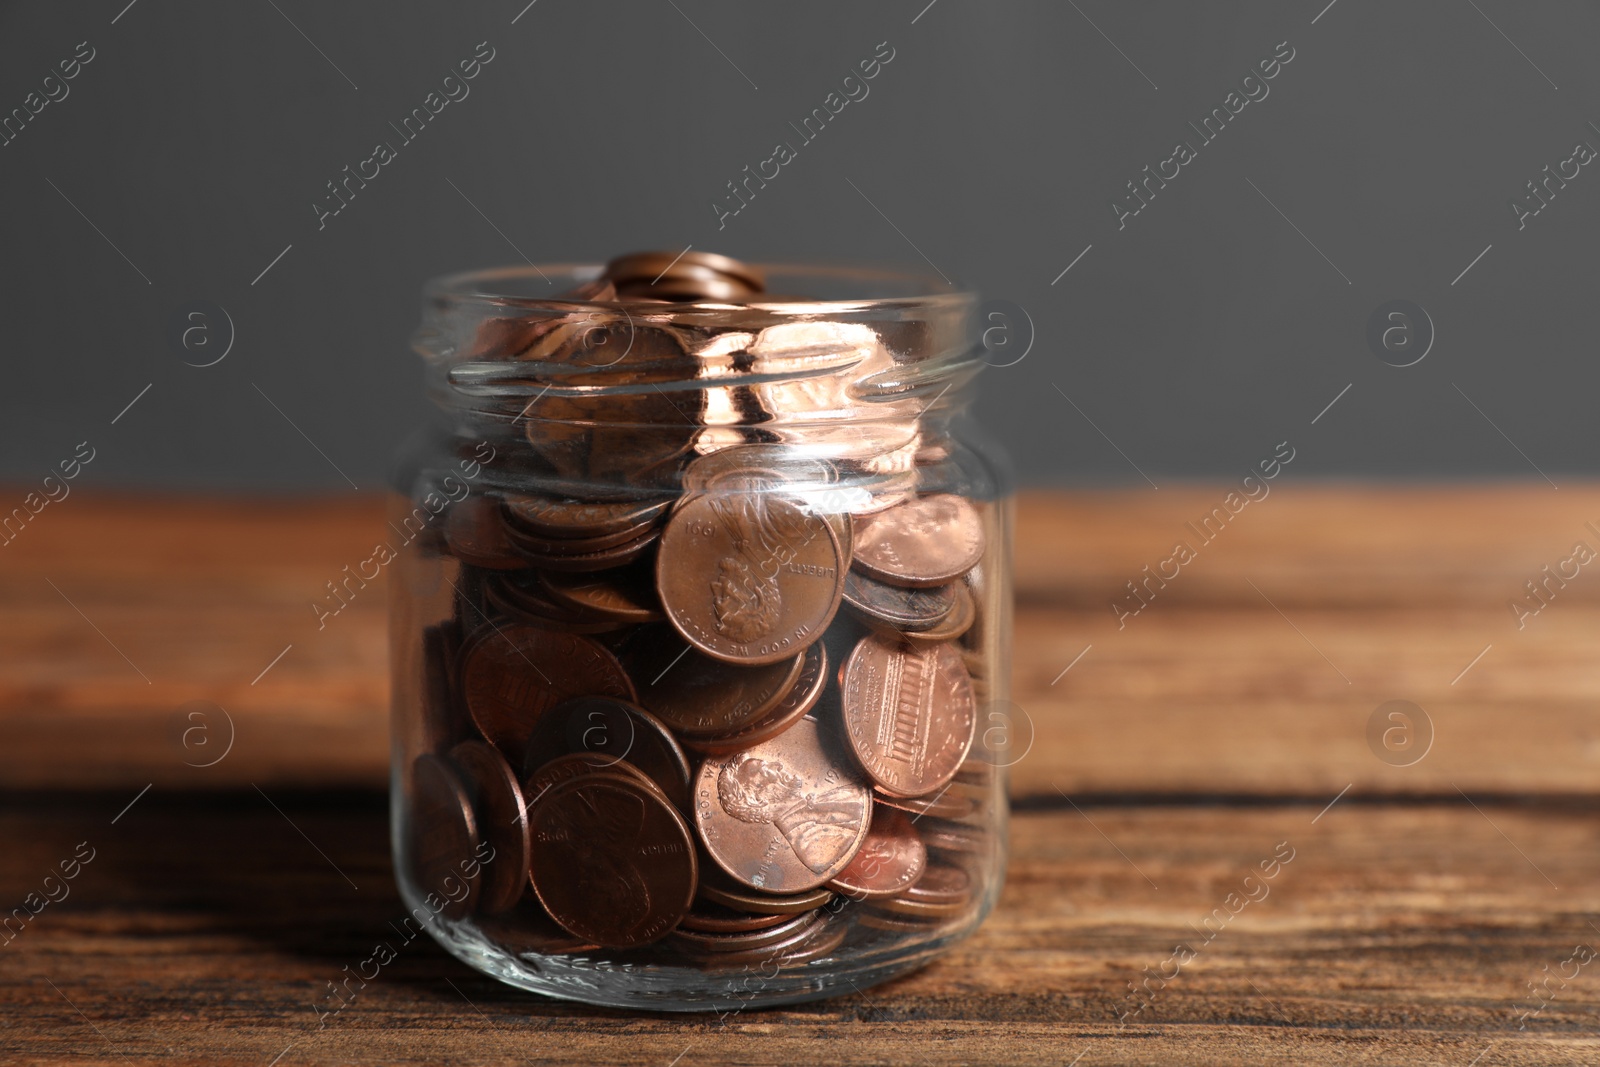 Photo of Donation jar with coins on wooden table against grey background